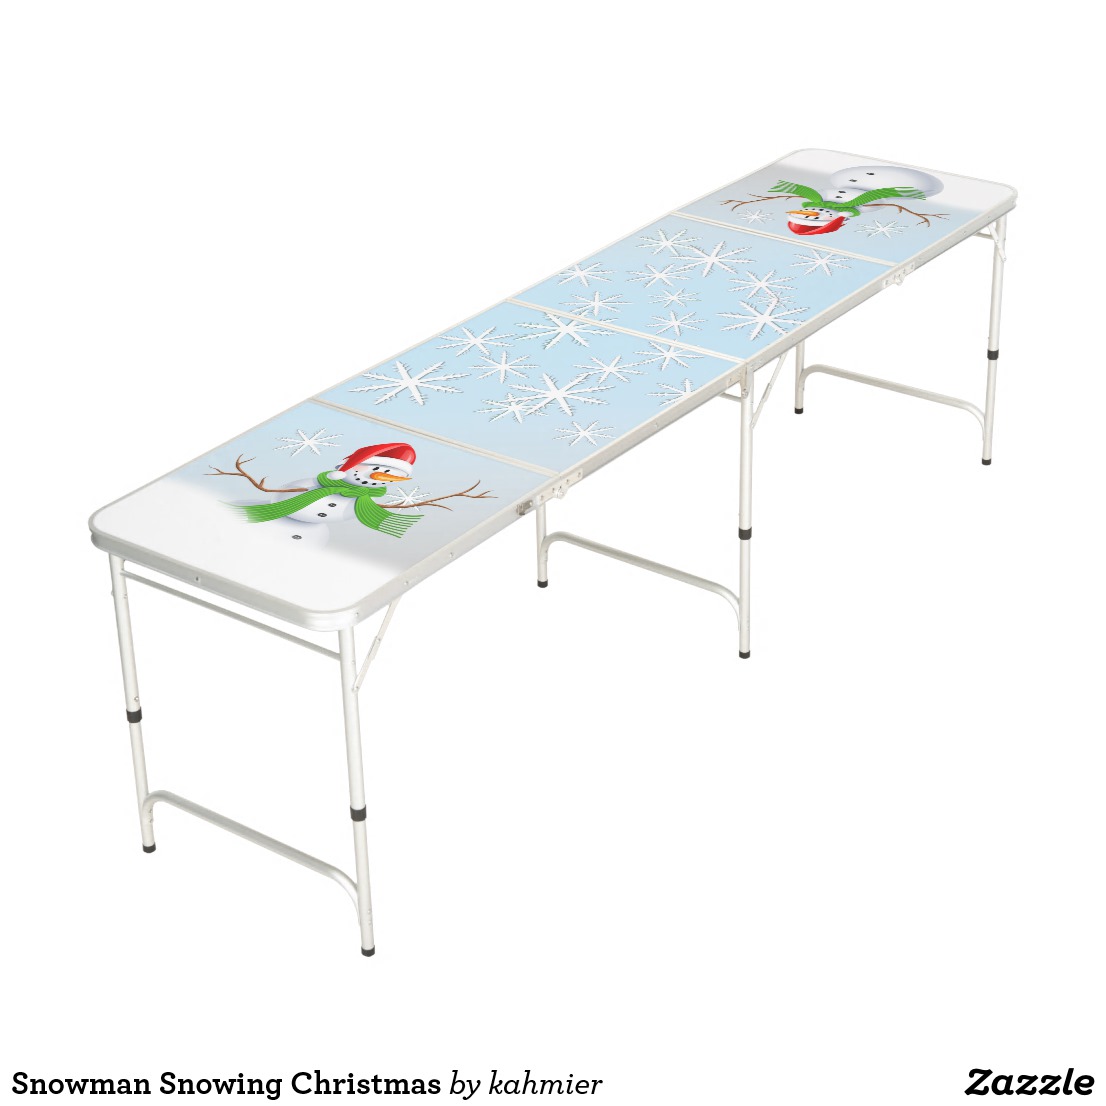 Snowman Snowing Christmas Beer Pong Table